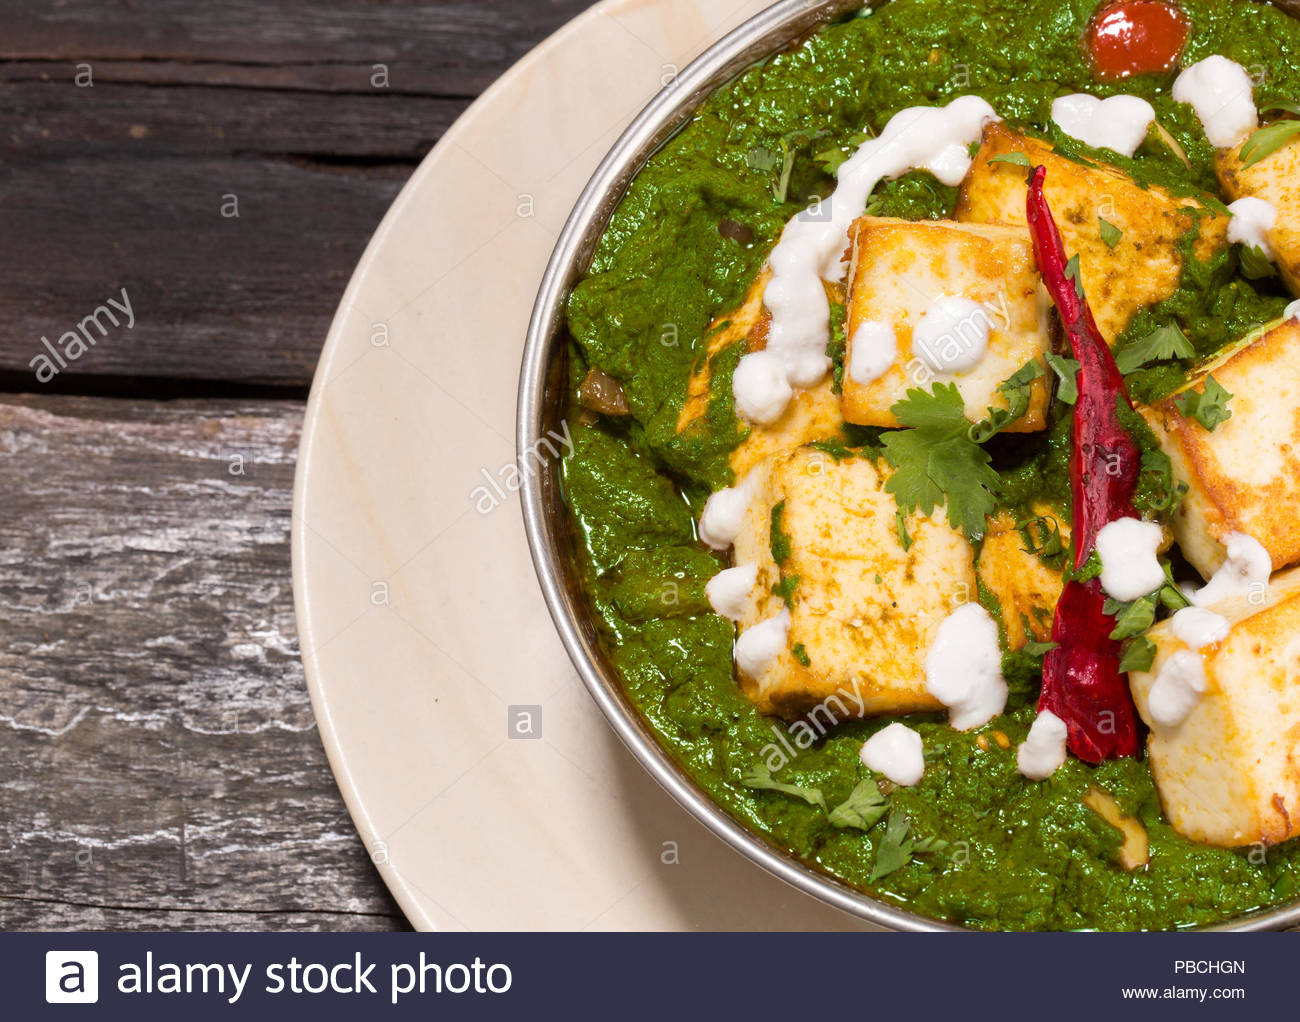 Indian Punjabi Cuisine Palak Paneer Made Up Of Spinach And Cottage